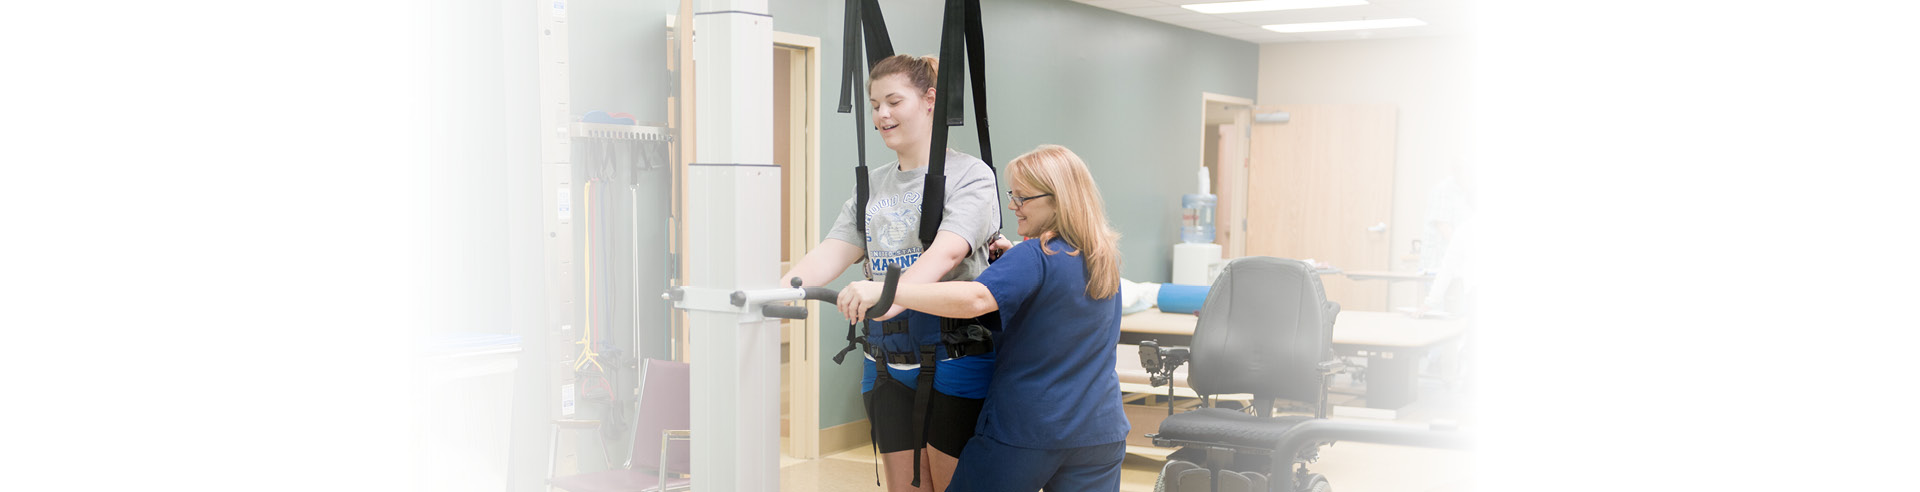 patient on litegait for therapy